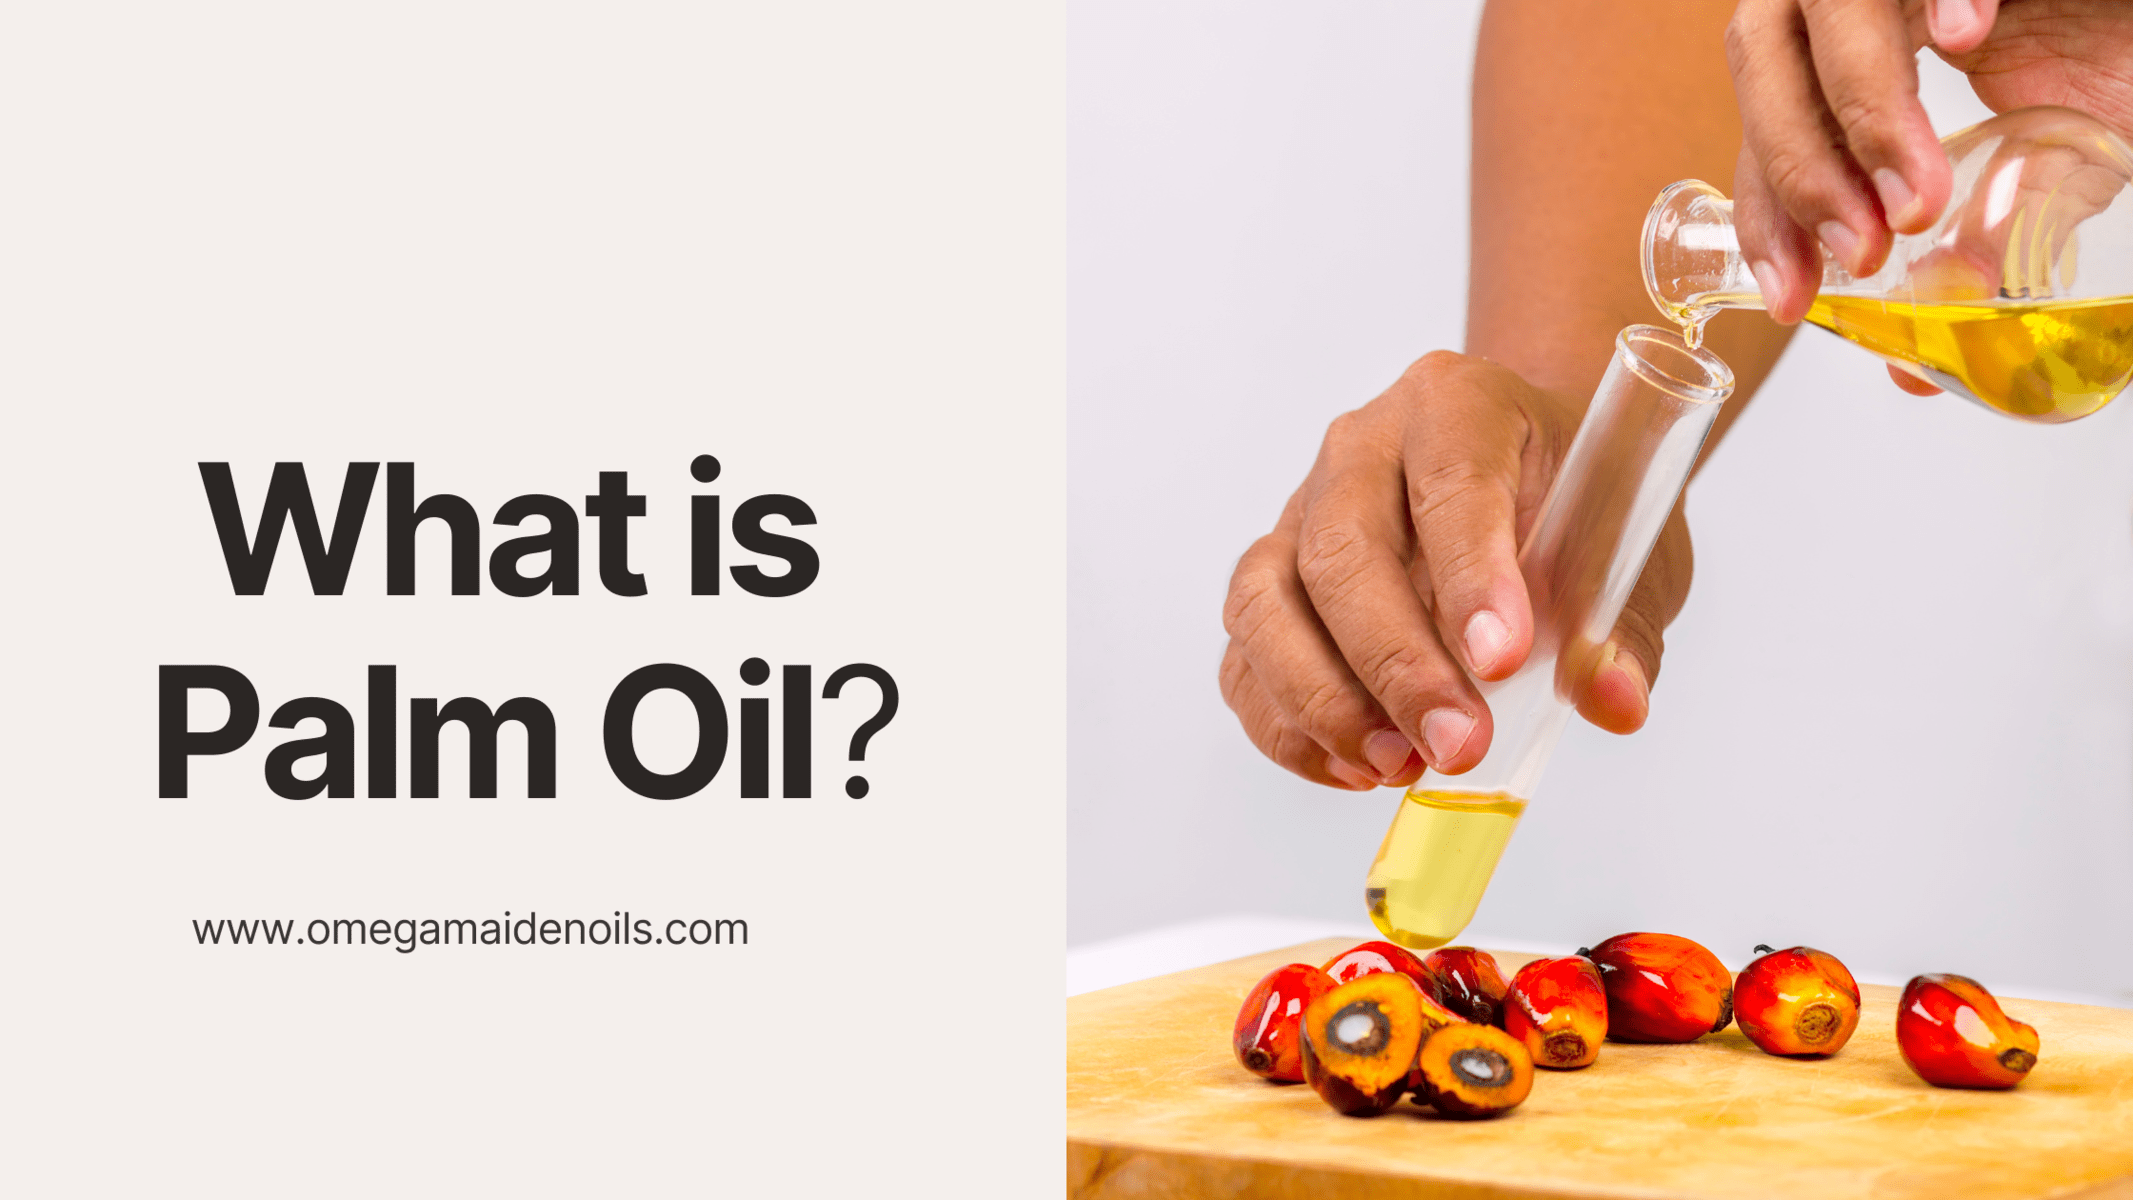 What is Palm Oil